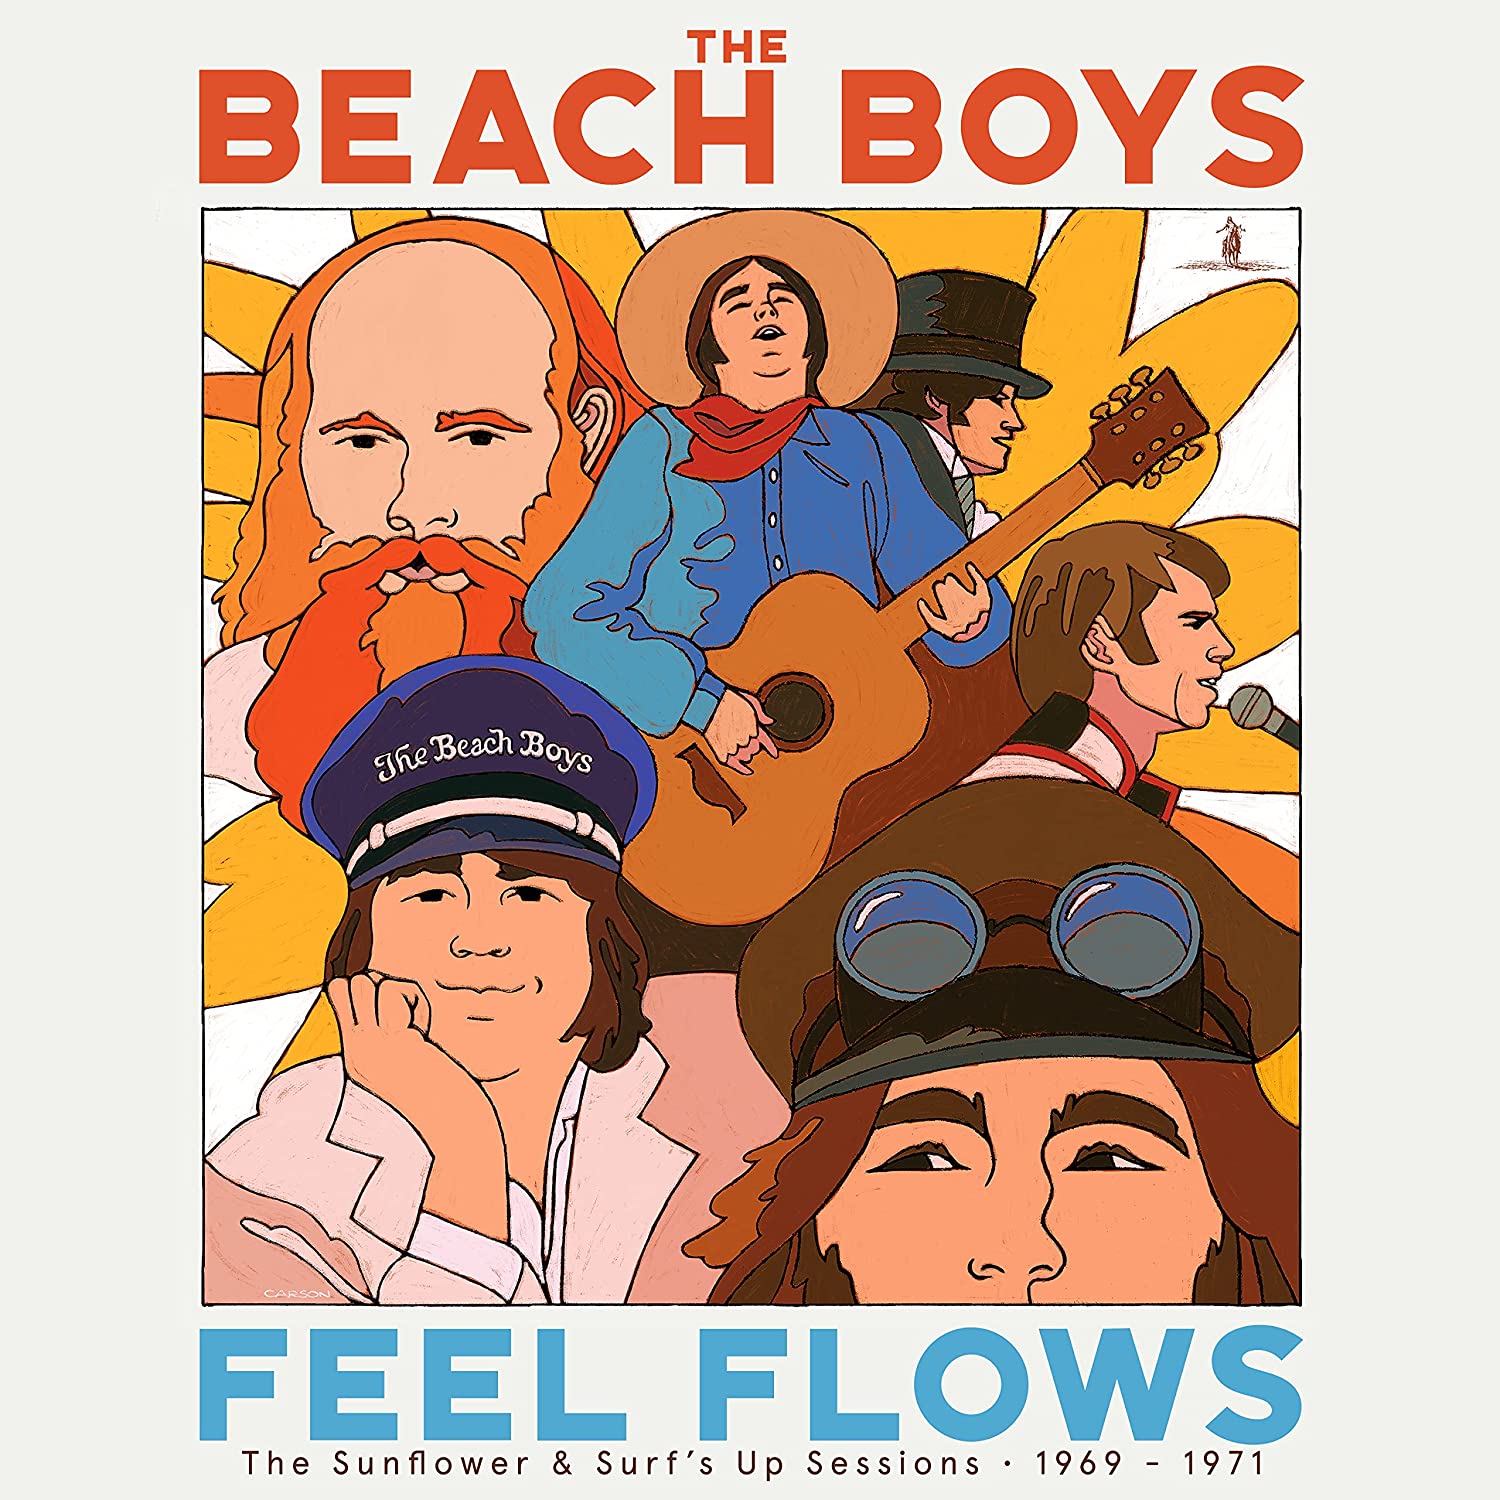 The Beach Boys - Feel Flows The Sunflower & Surf's Up Sessions 1969-1971 [2-lp]